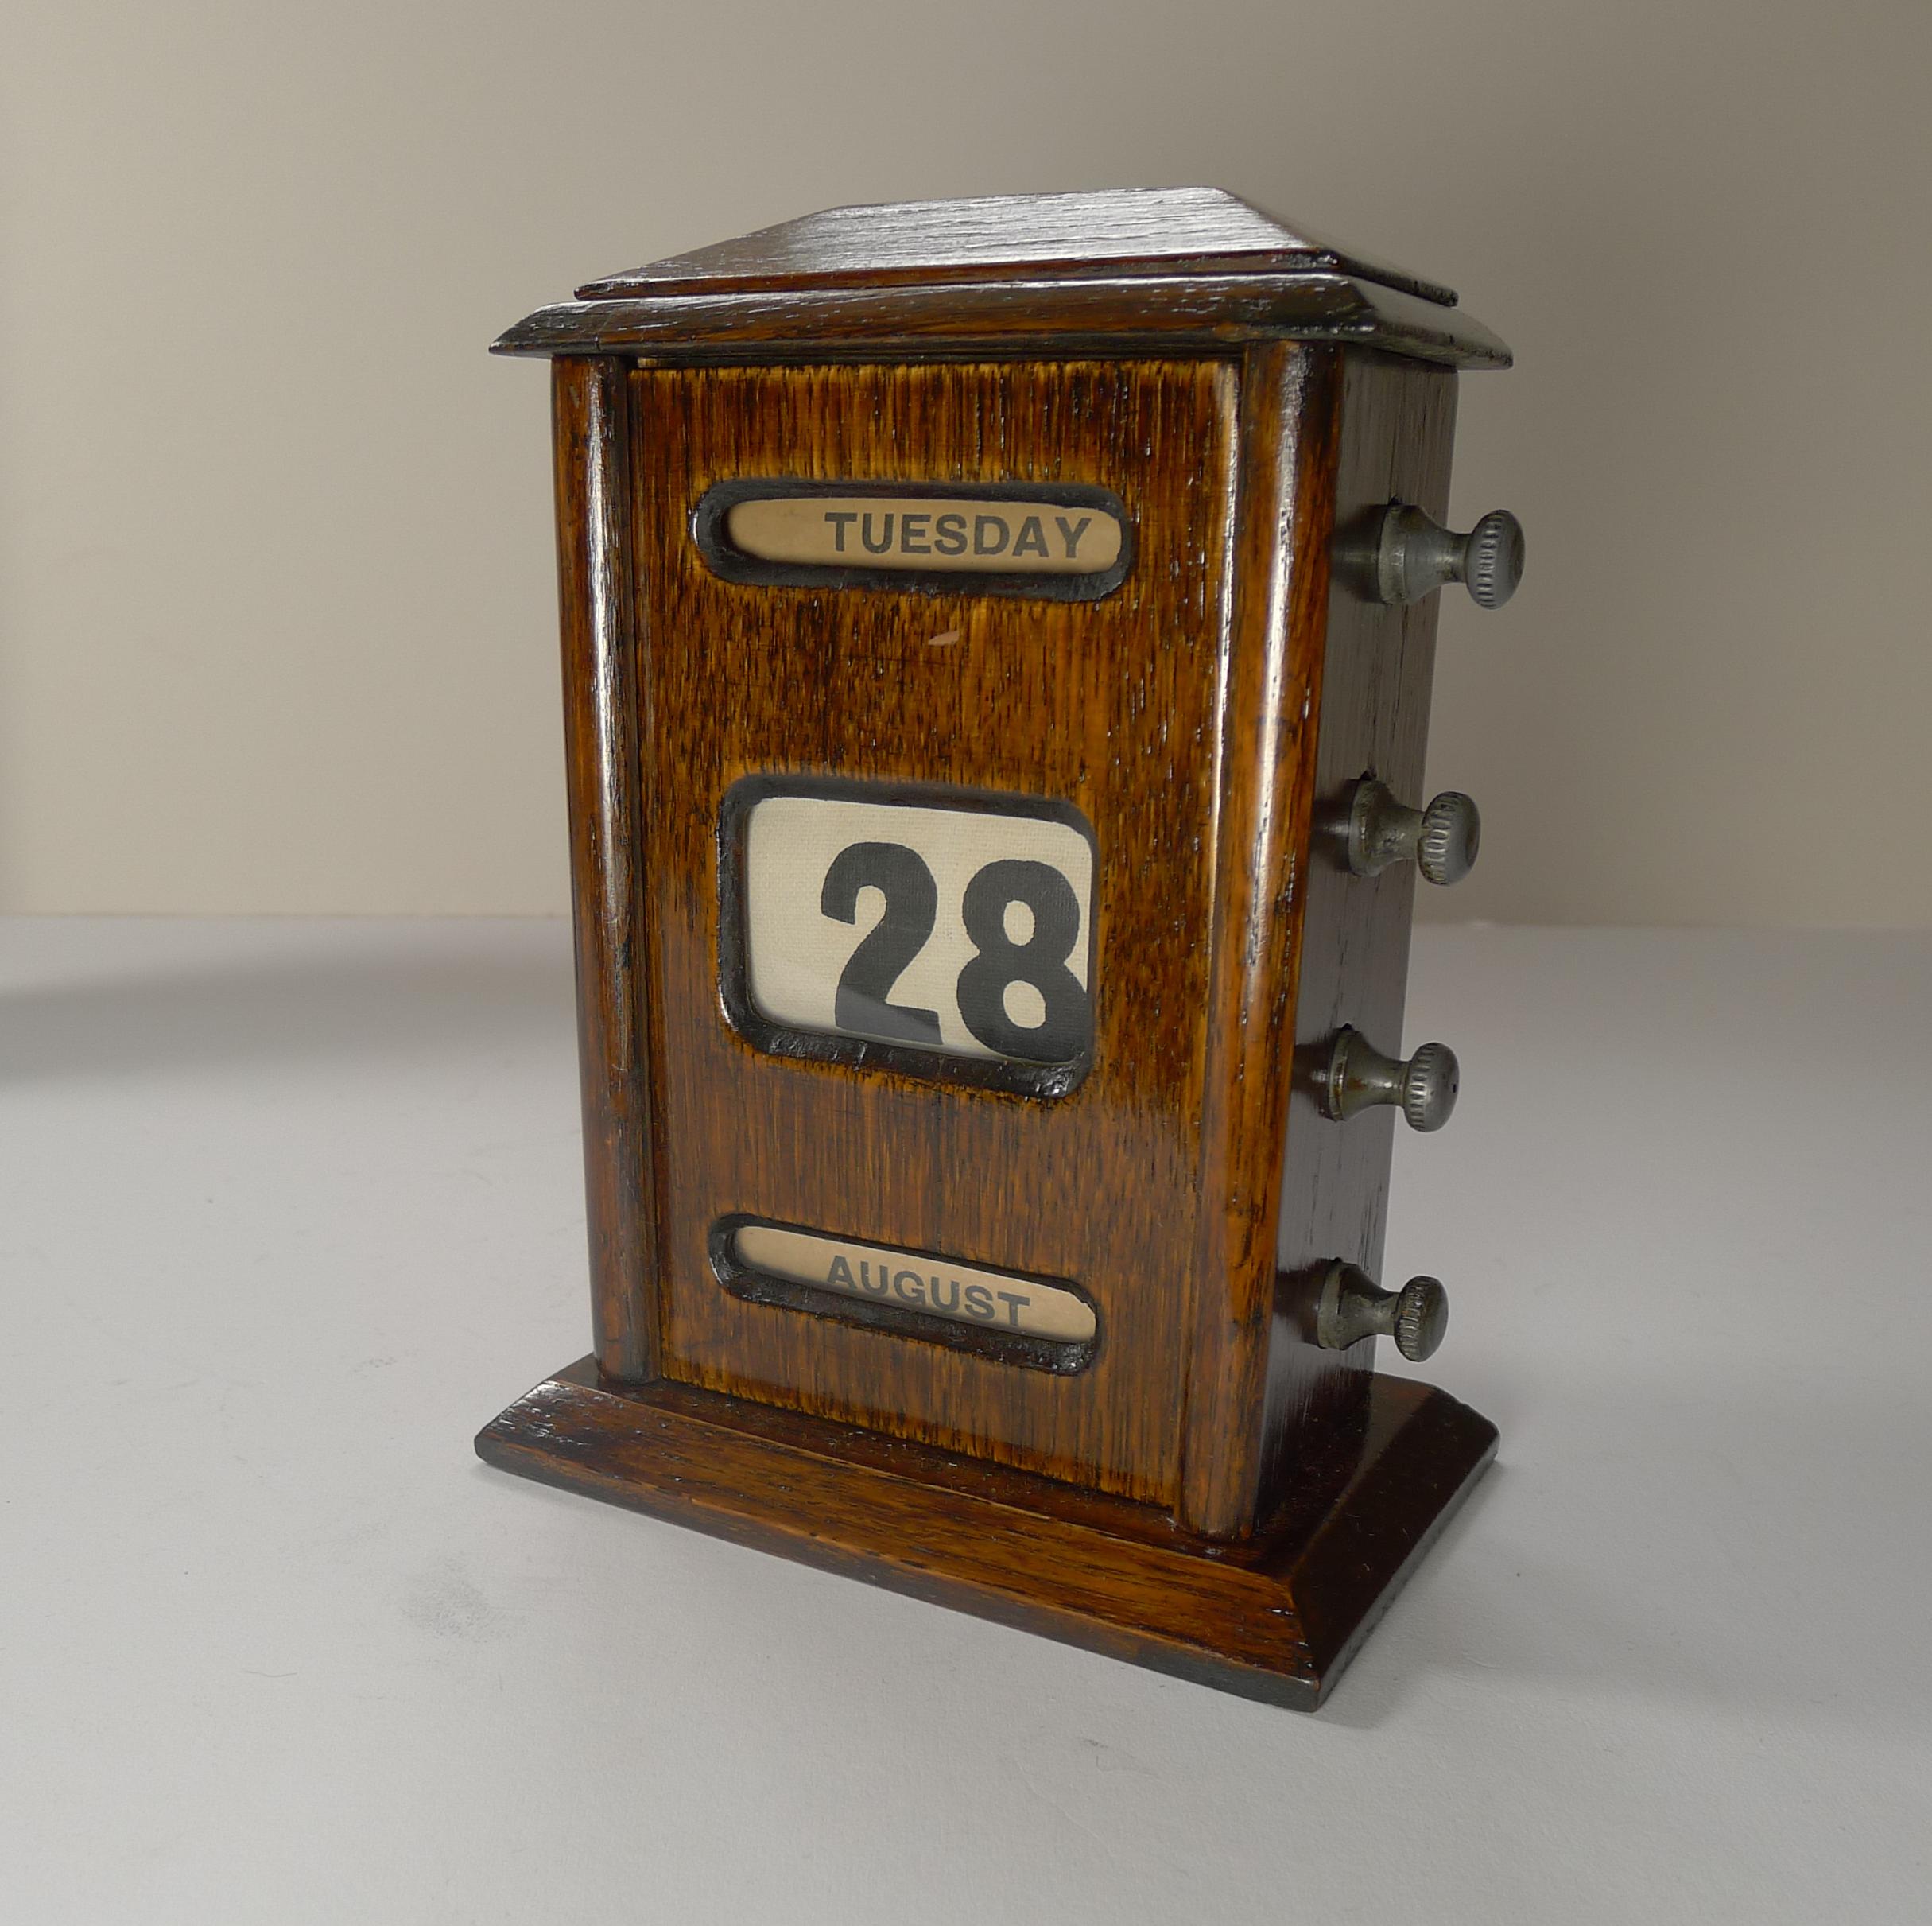 A handsome desk-top wooden perpetual calendar made from solid English.

The metal keys to the sides are used to forward and return the day, date and month rolls behind the glazed apertures.

Dating to the Edwardian era, c.1900 it remains in